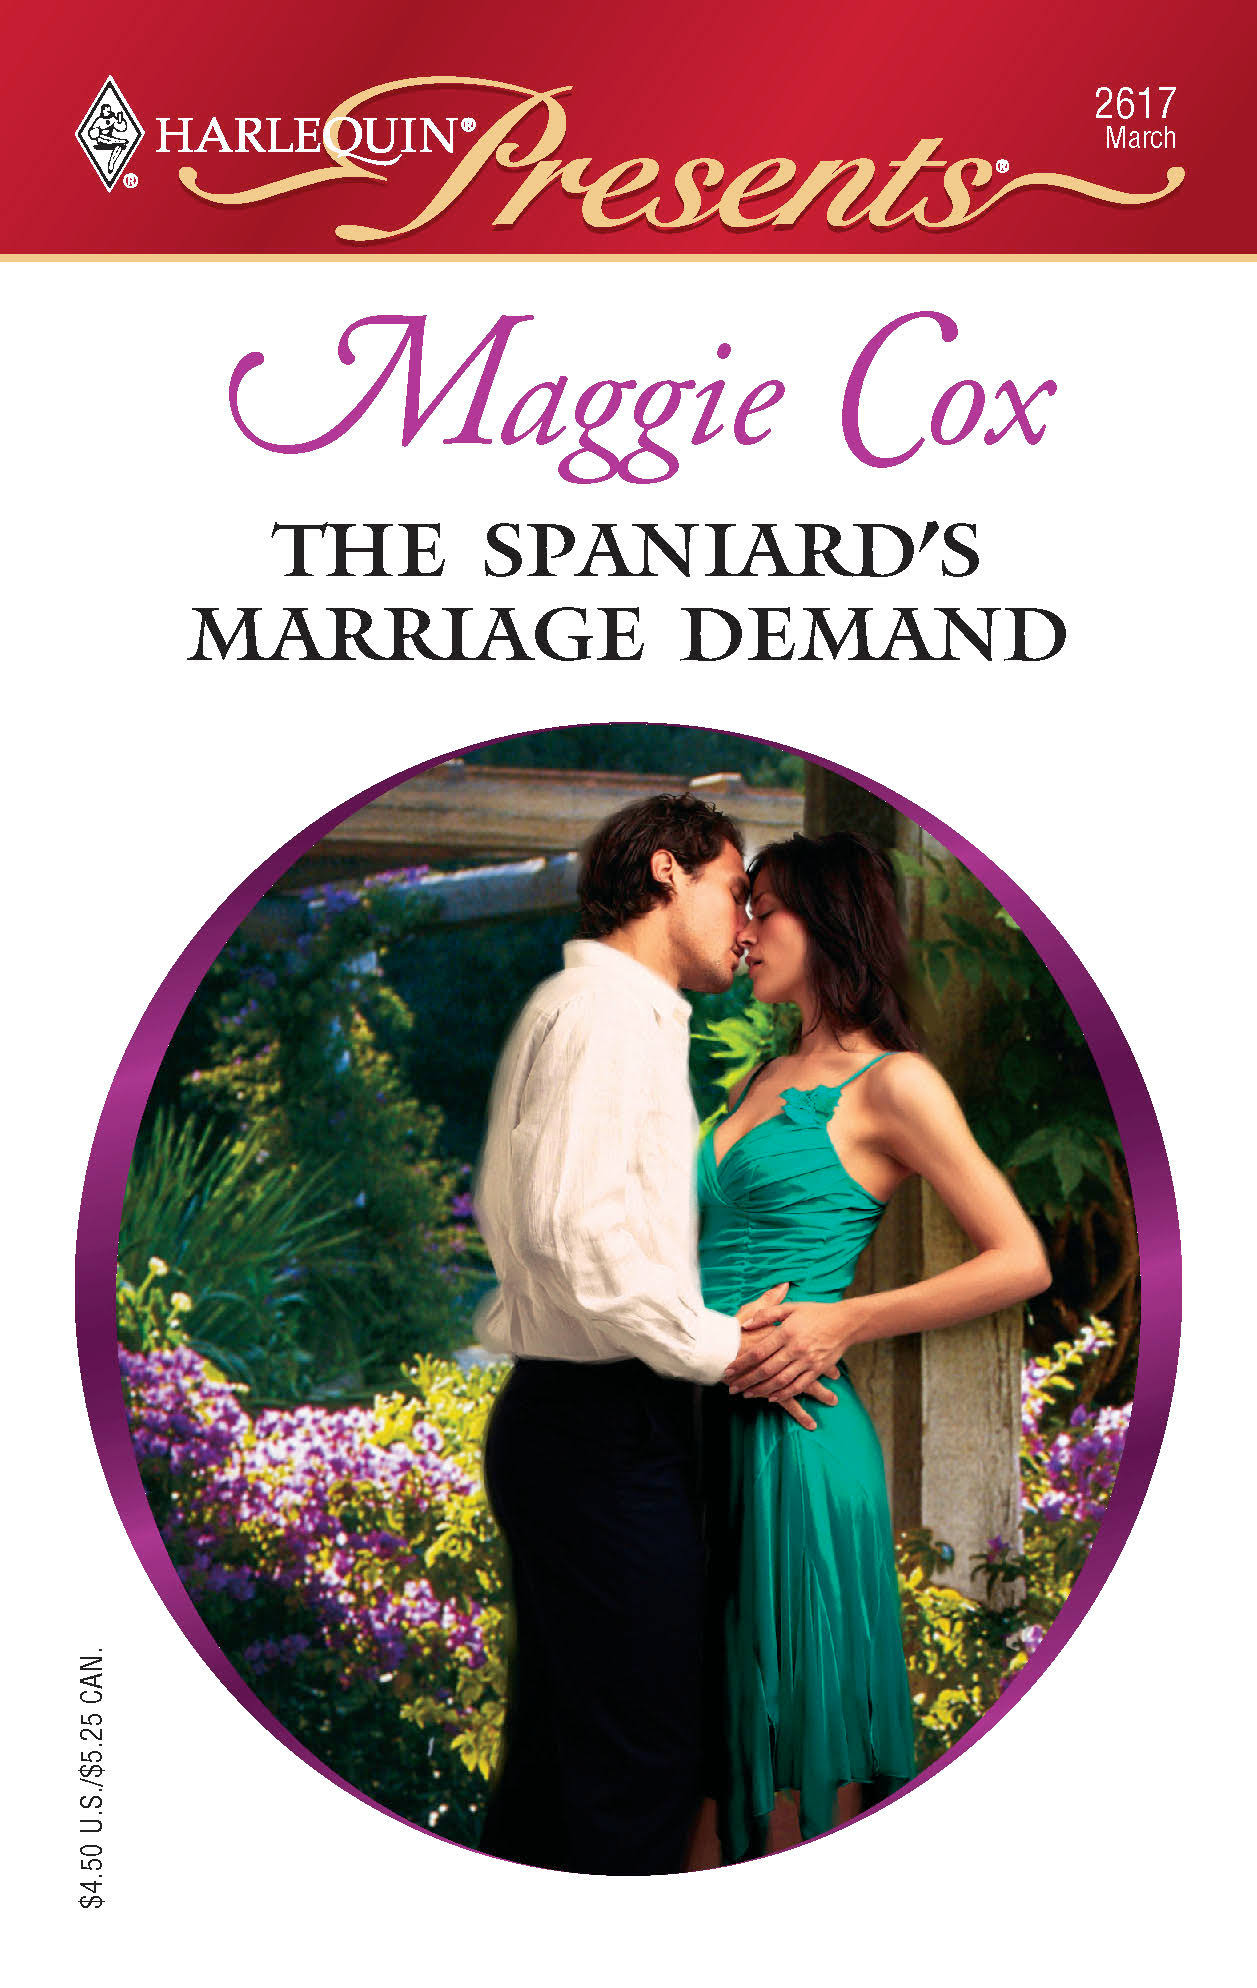 The Spaniard's Marriage Demand: A Mediterranean Marriage by Cox, Maggie - 0373126174 by Harlequin Presents | Thriftbooks.com